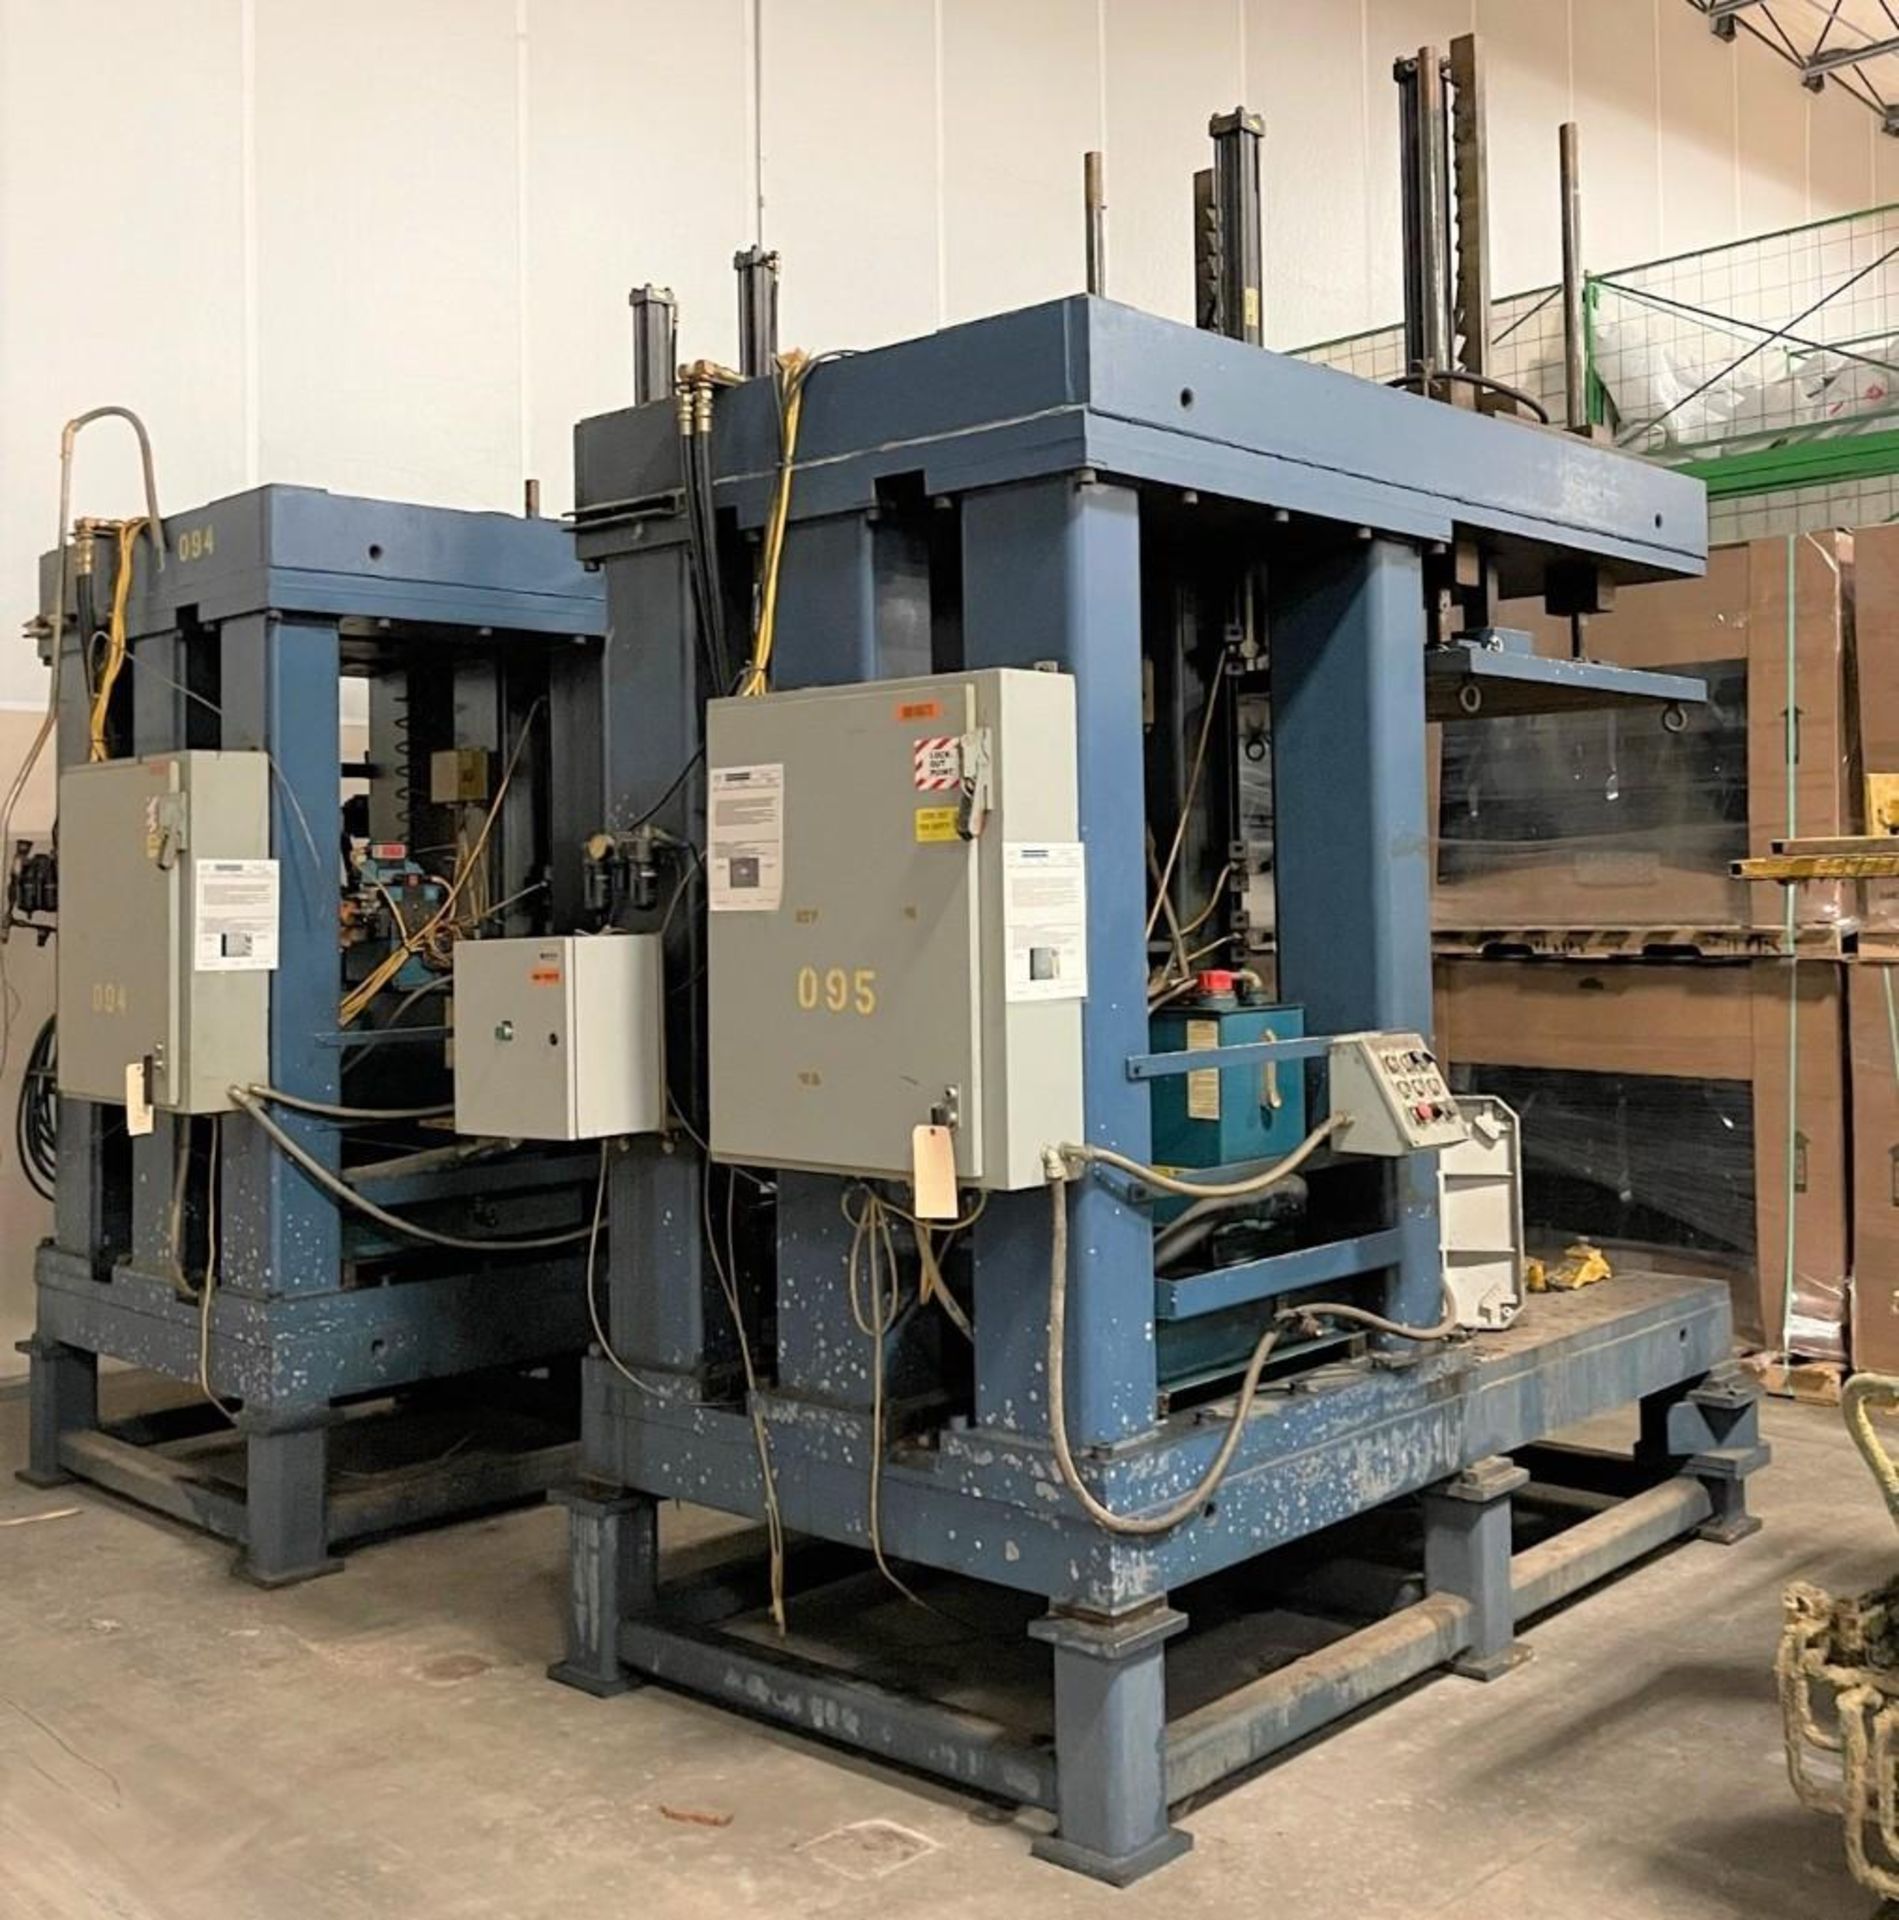 Lot of (2) Hydraulic Presses for Automotive Molding